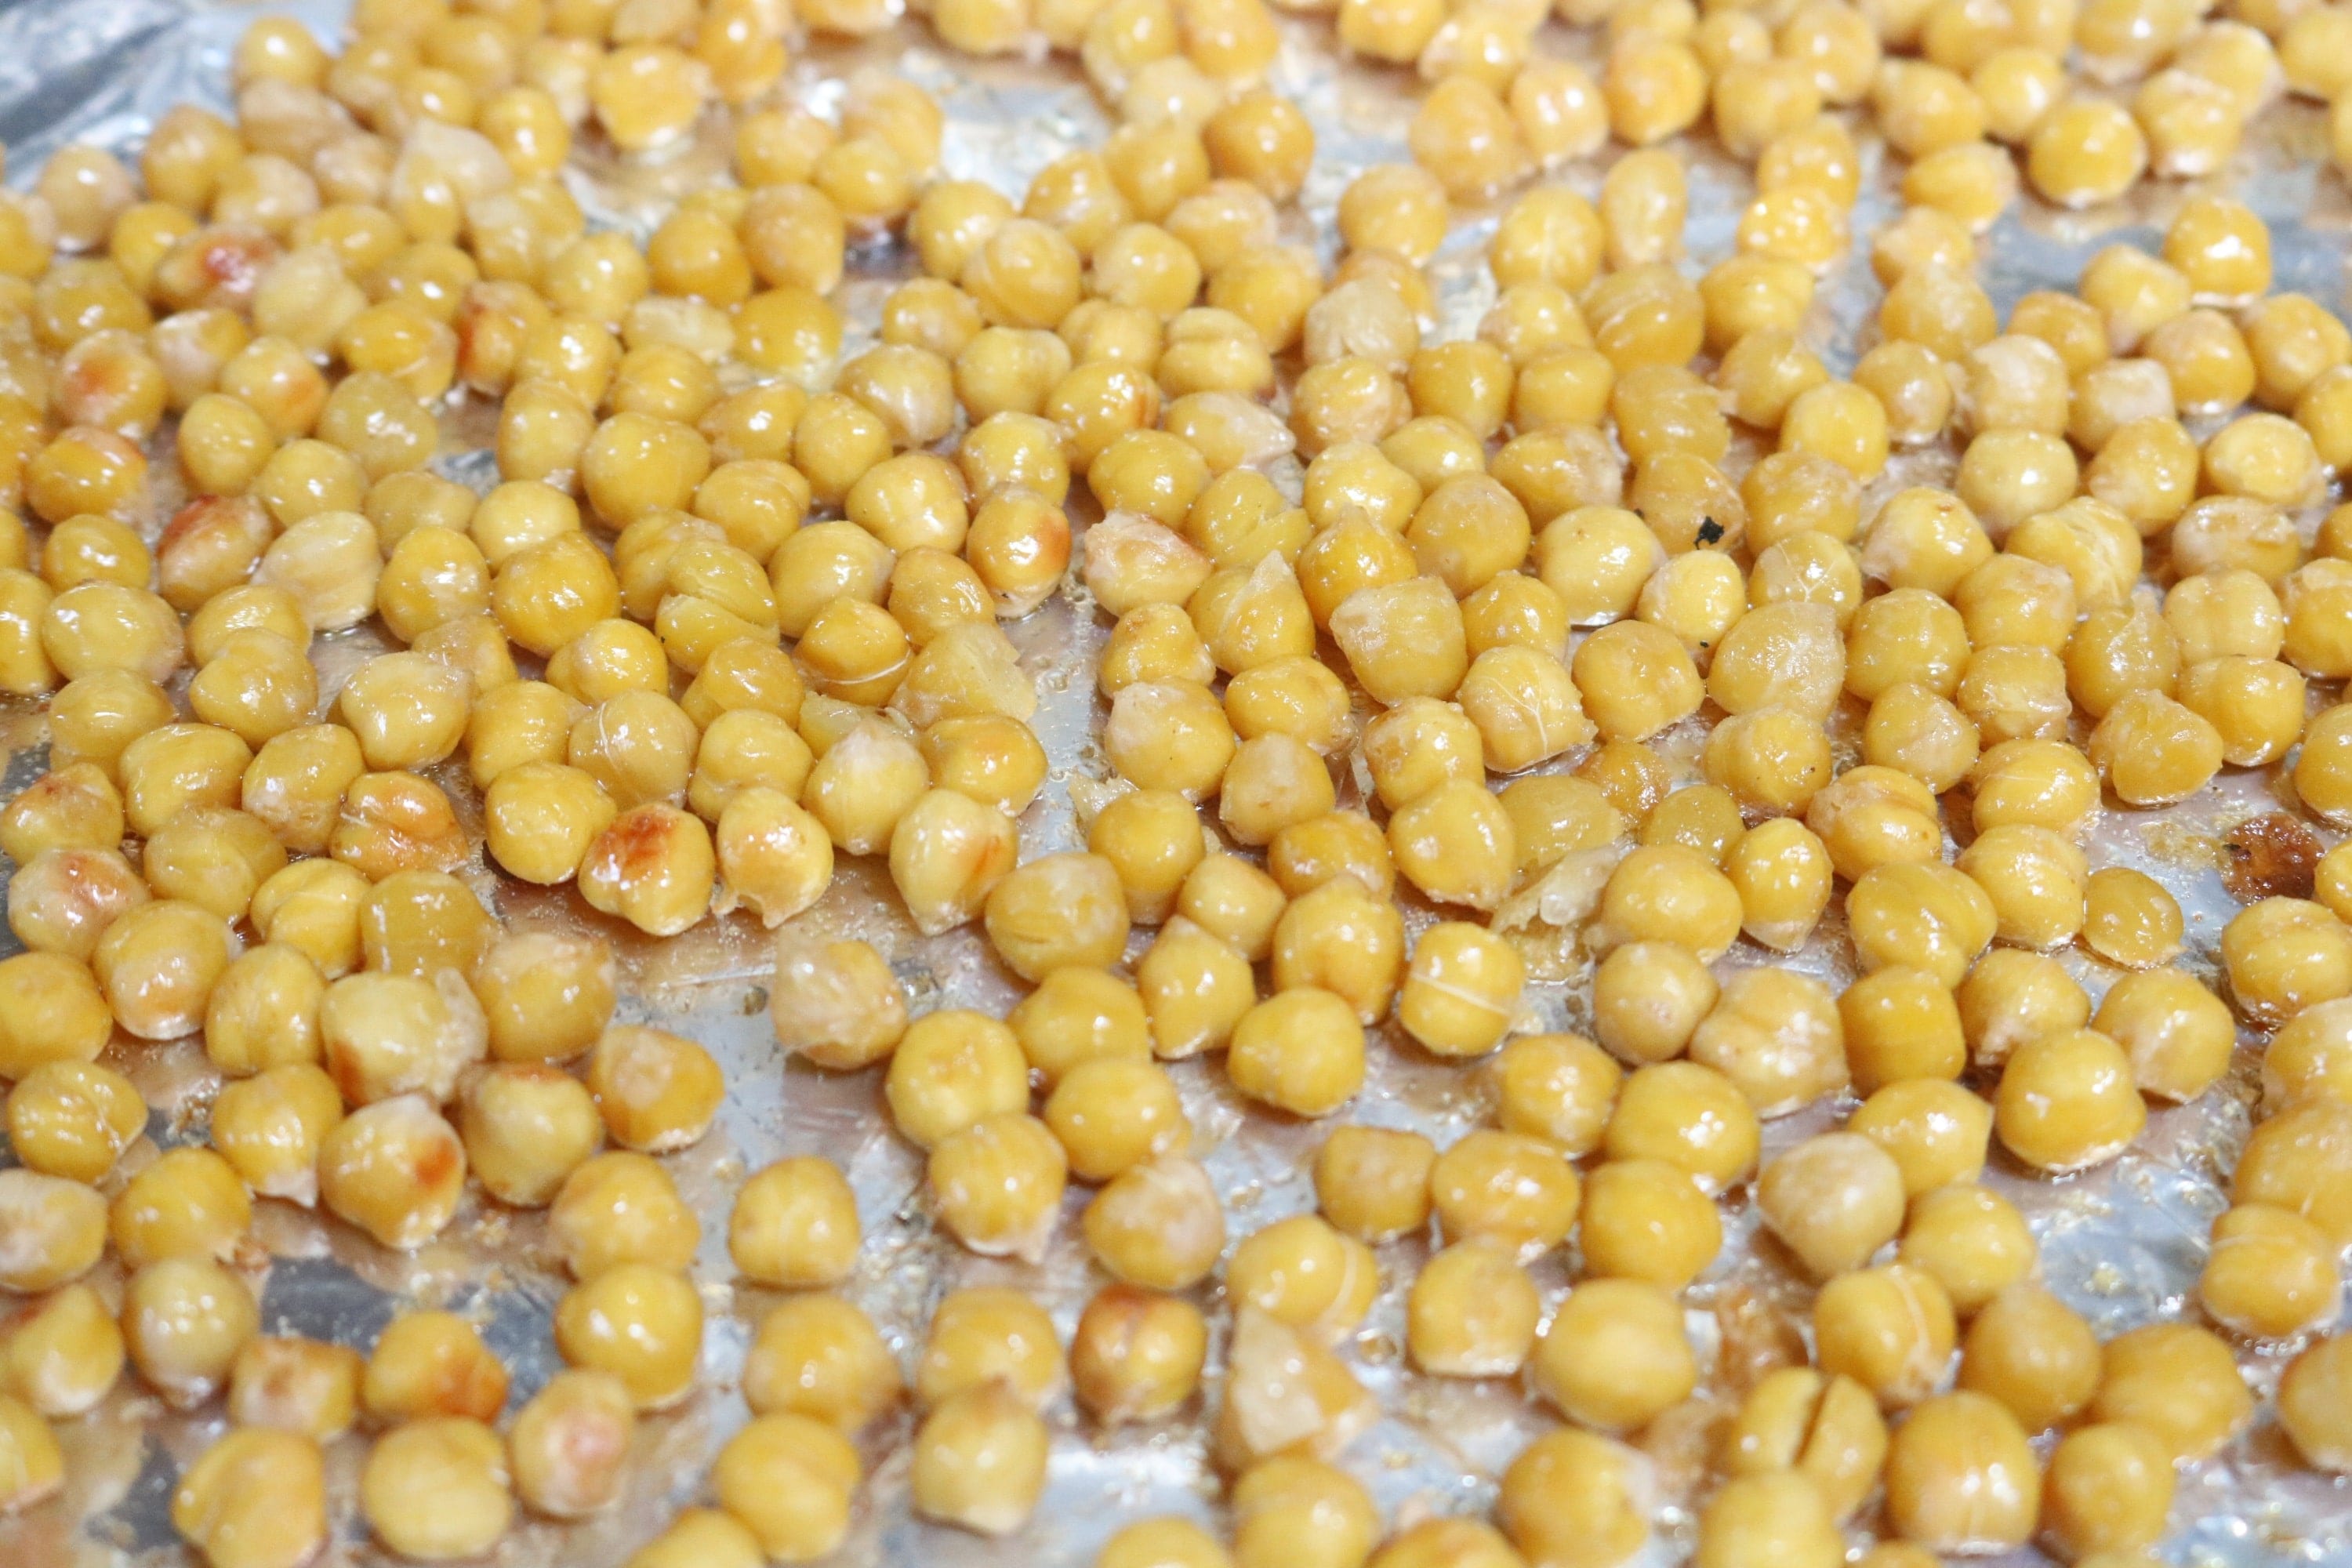 Salt and vinegar roasted chickpeas are a quick and portable snack for camping or hiking. They're easy to make, filling and simple.